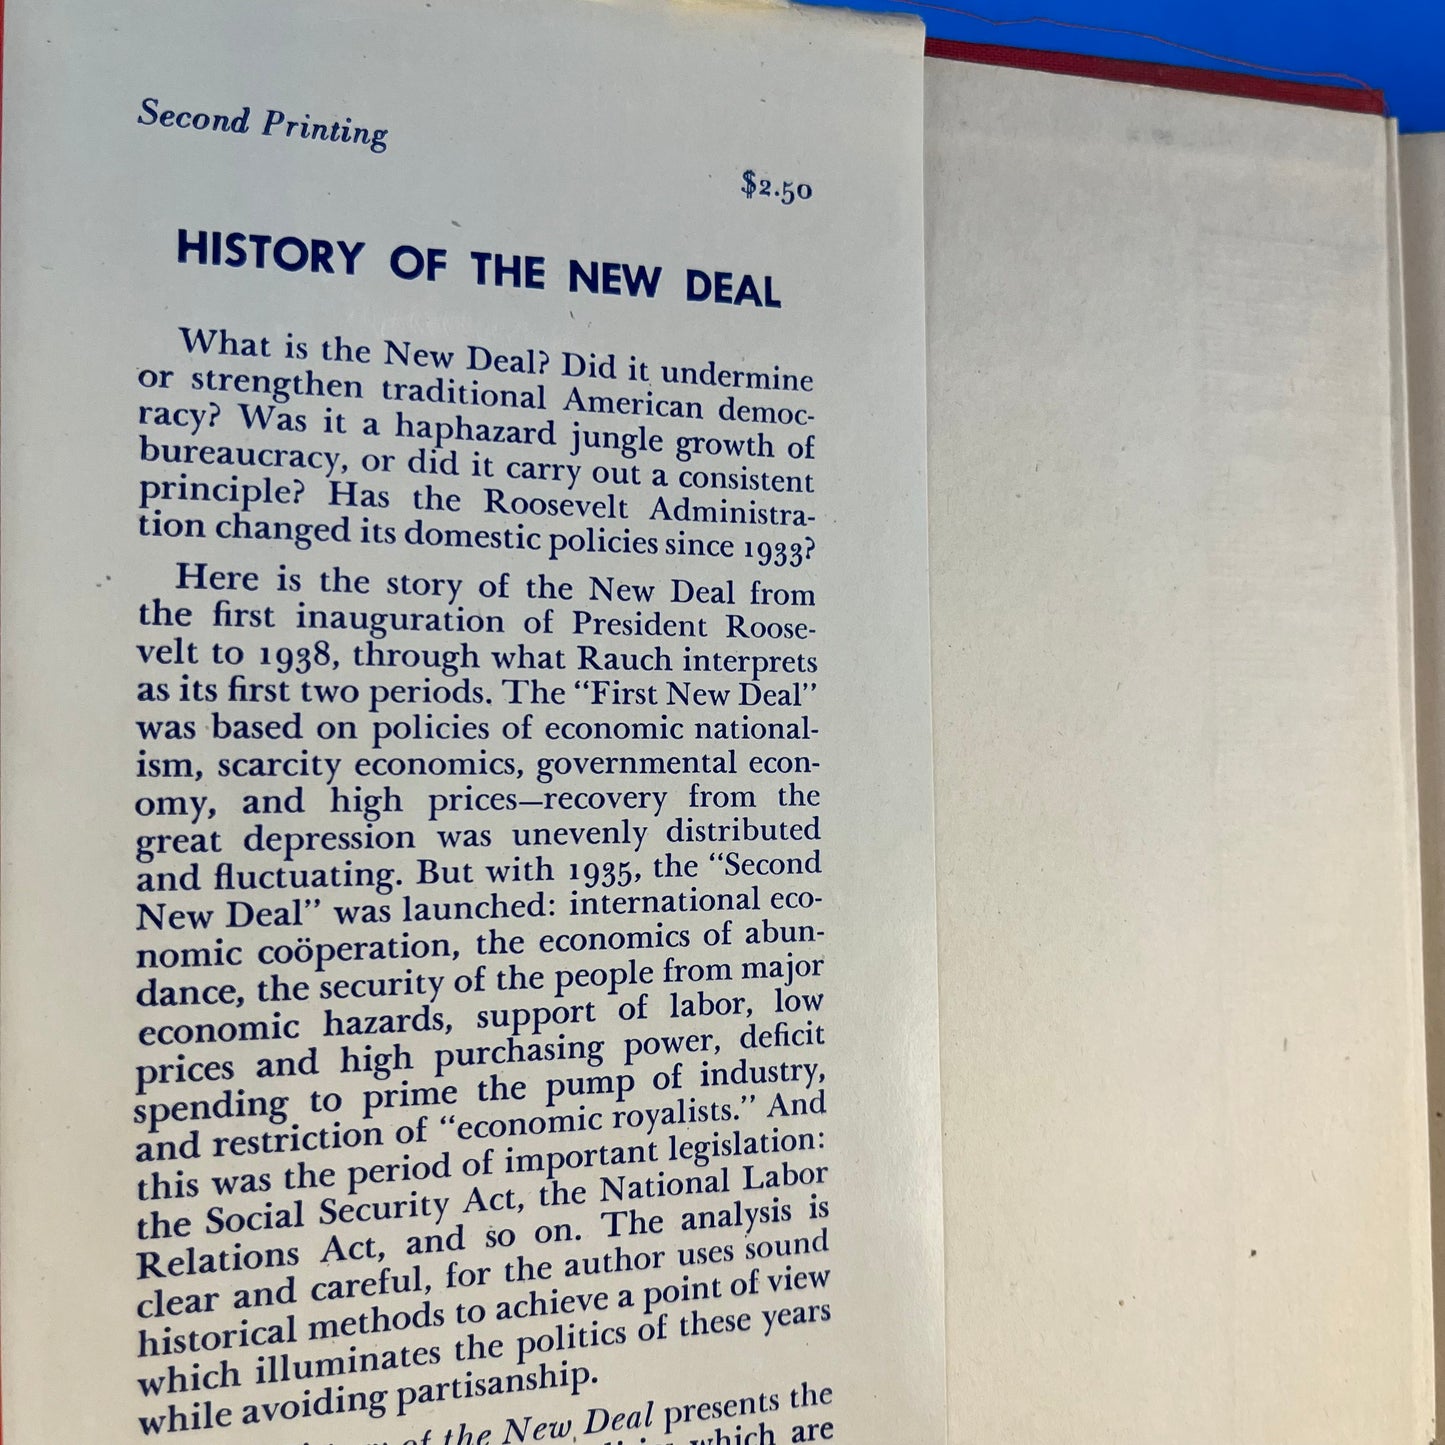 The History of the New Deal 1933-1938